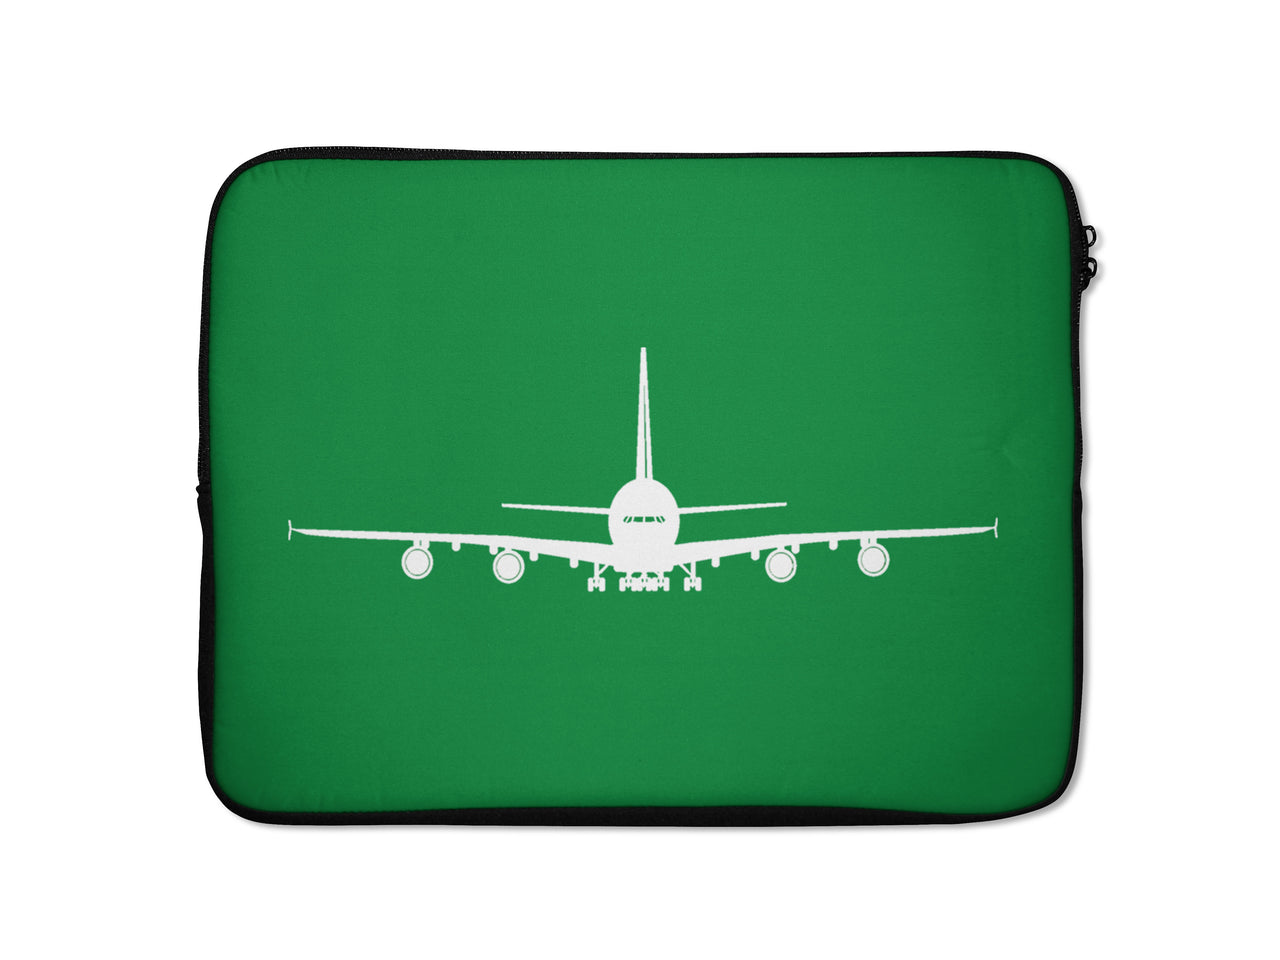 Airbus A380 Silhouette Designed Laptop & Tablet Cases